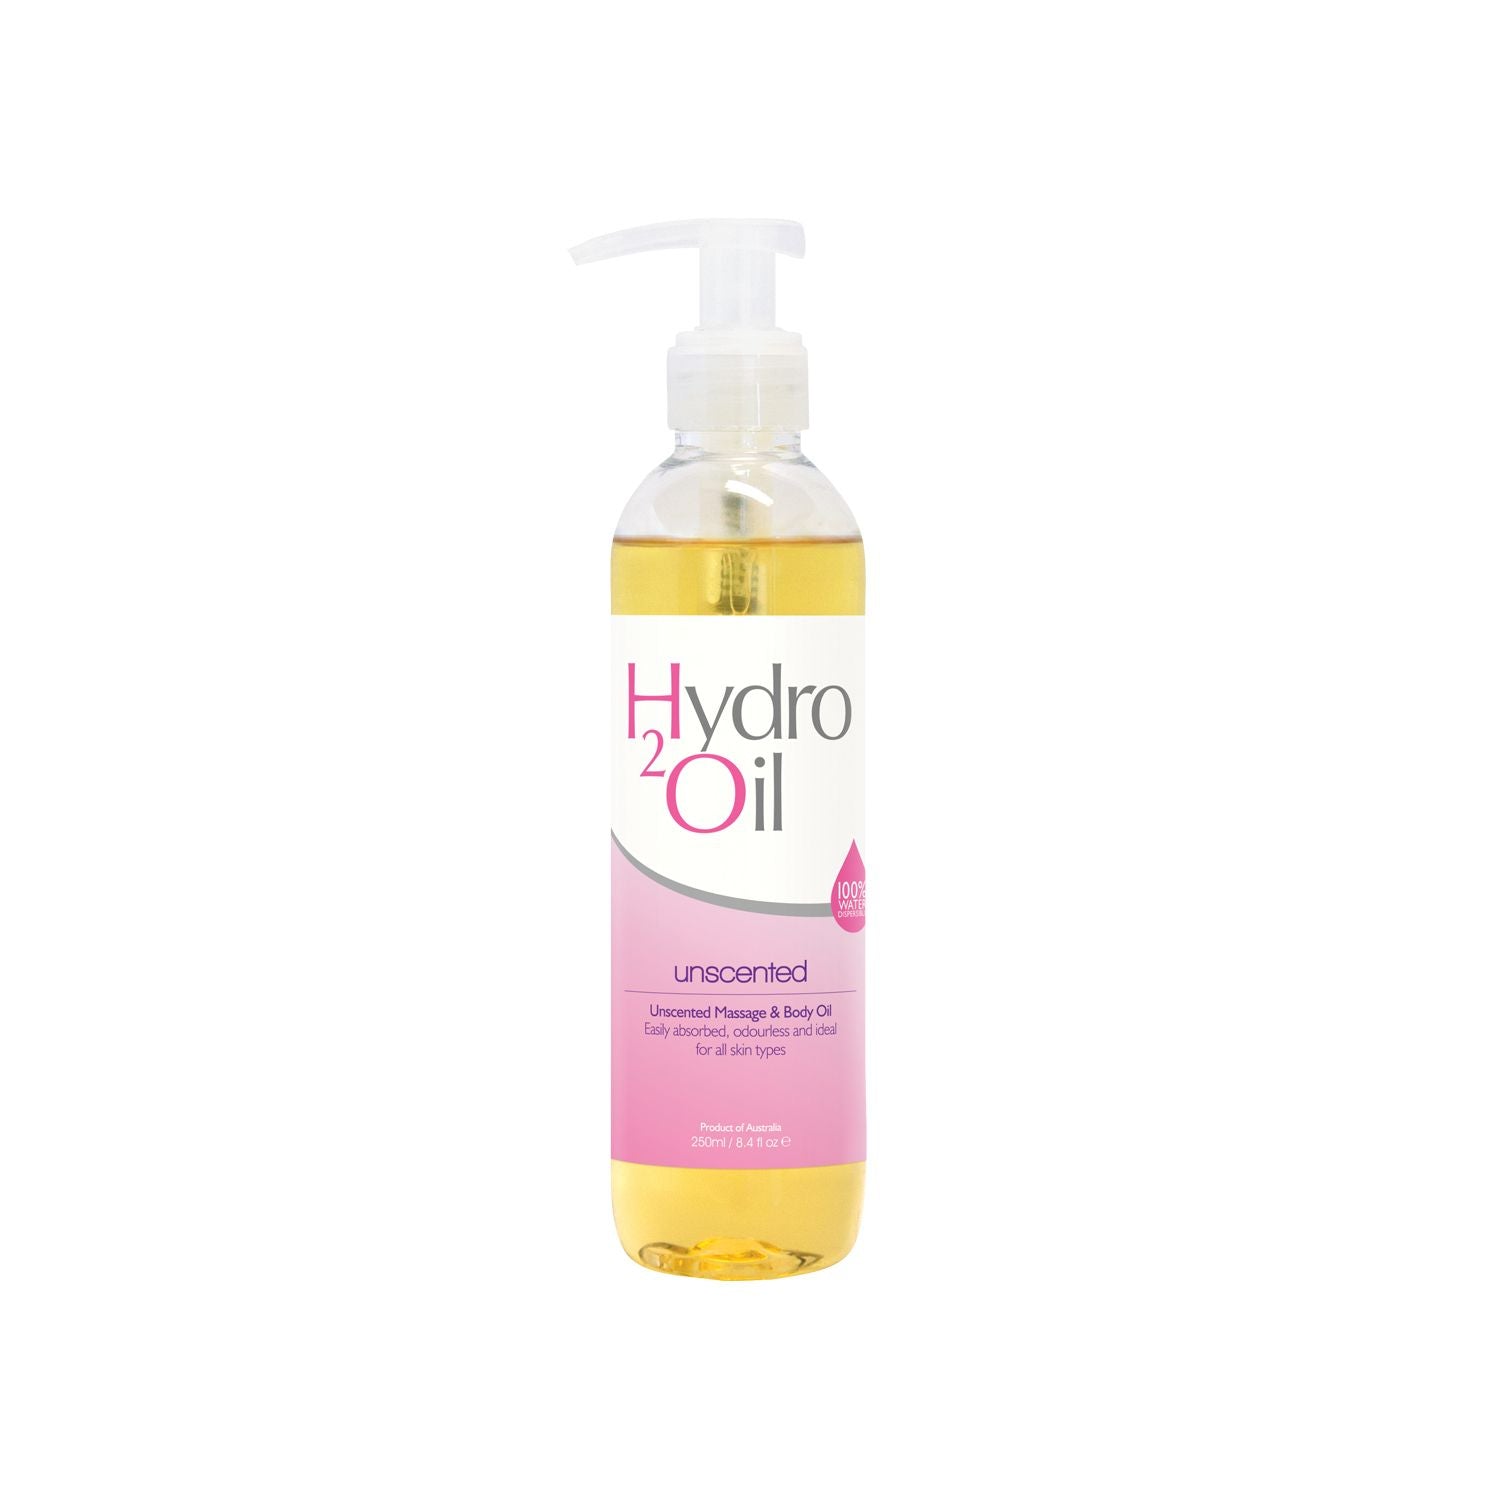 Hydro 2 Oil - Unscented 250ml